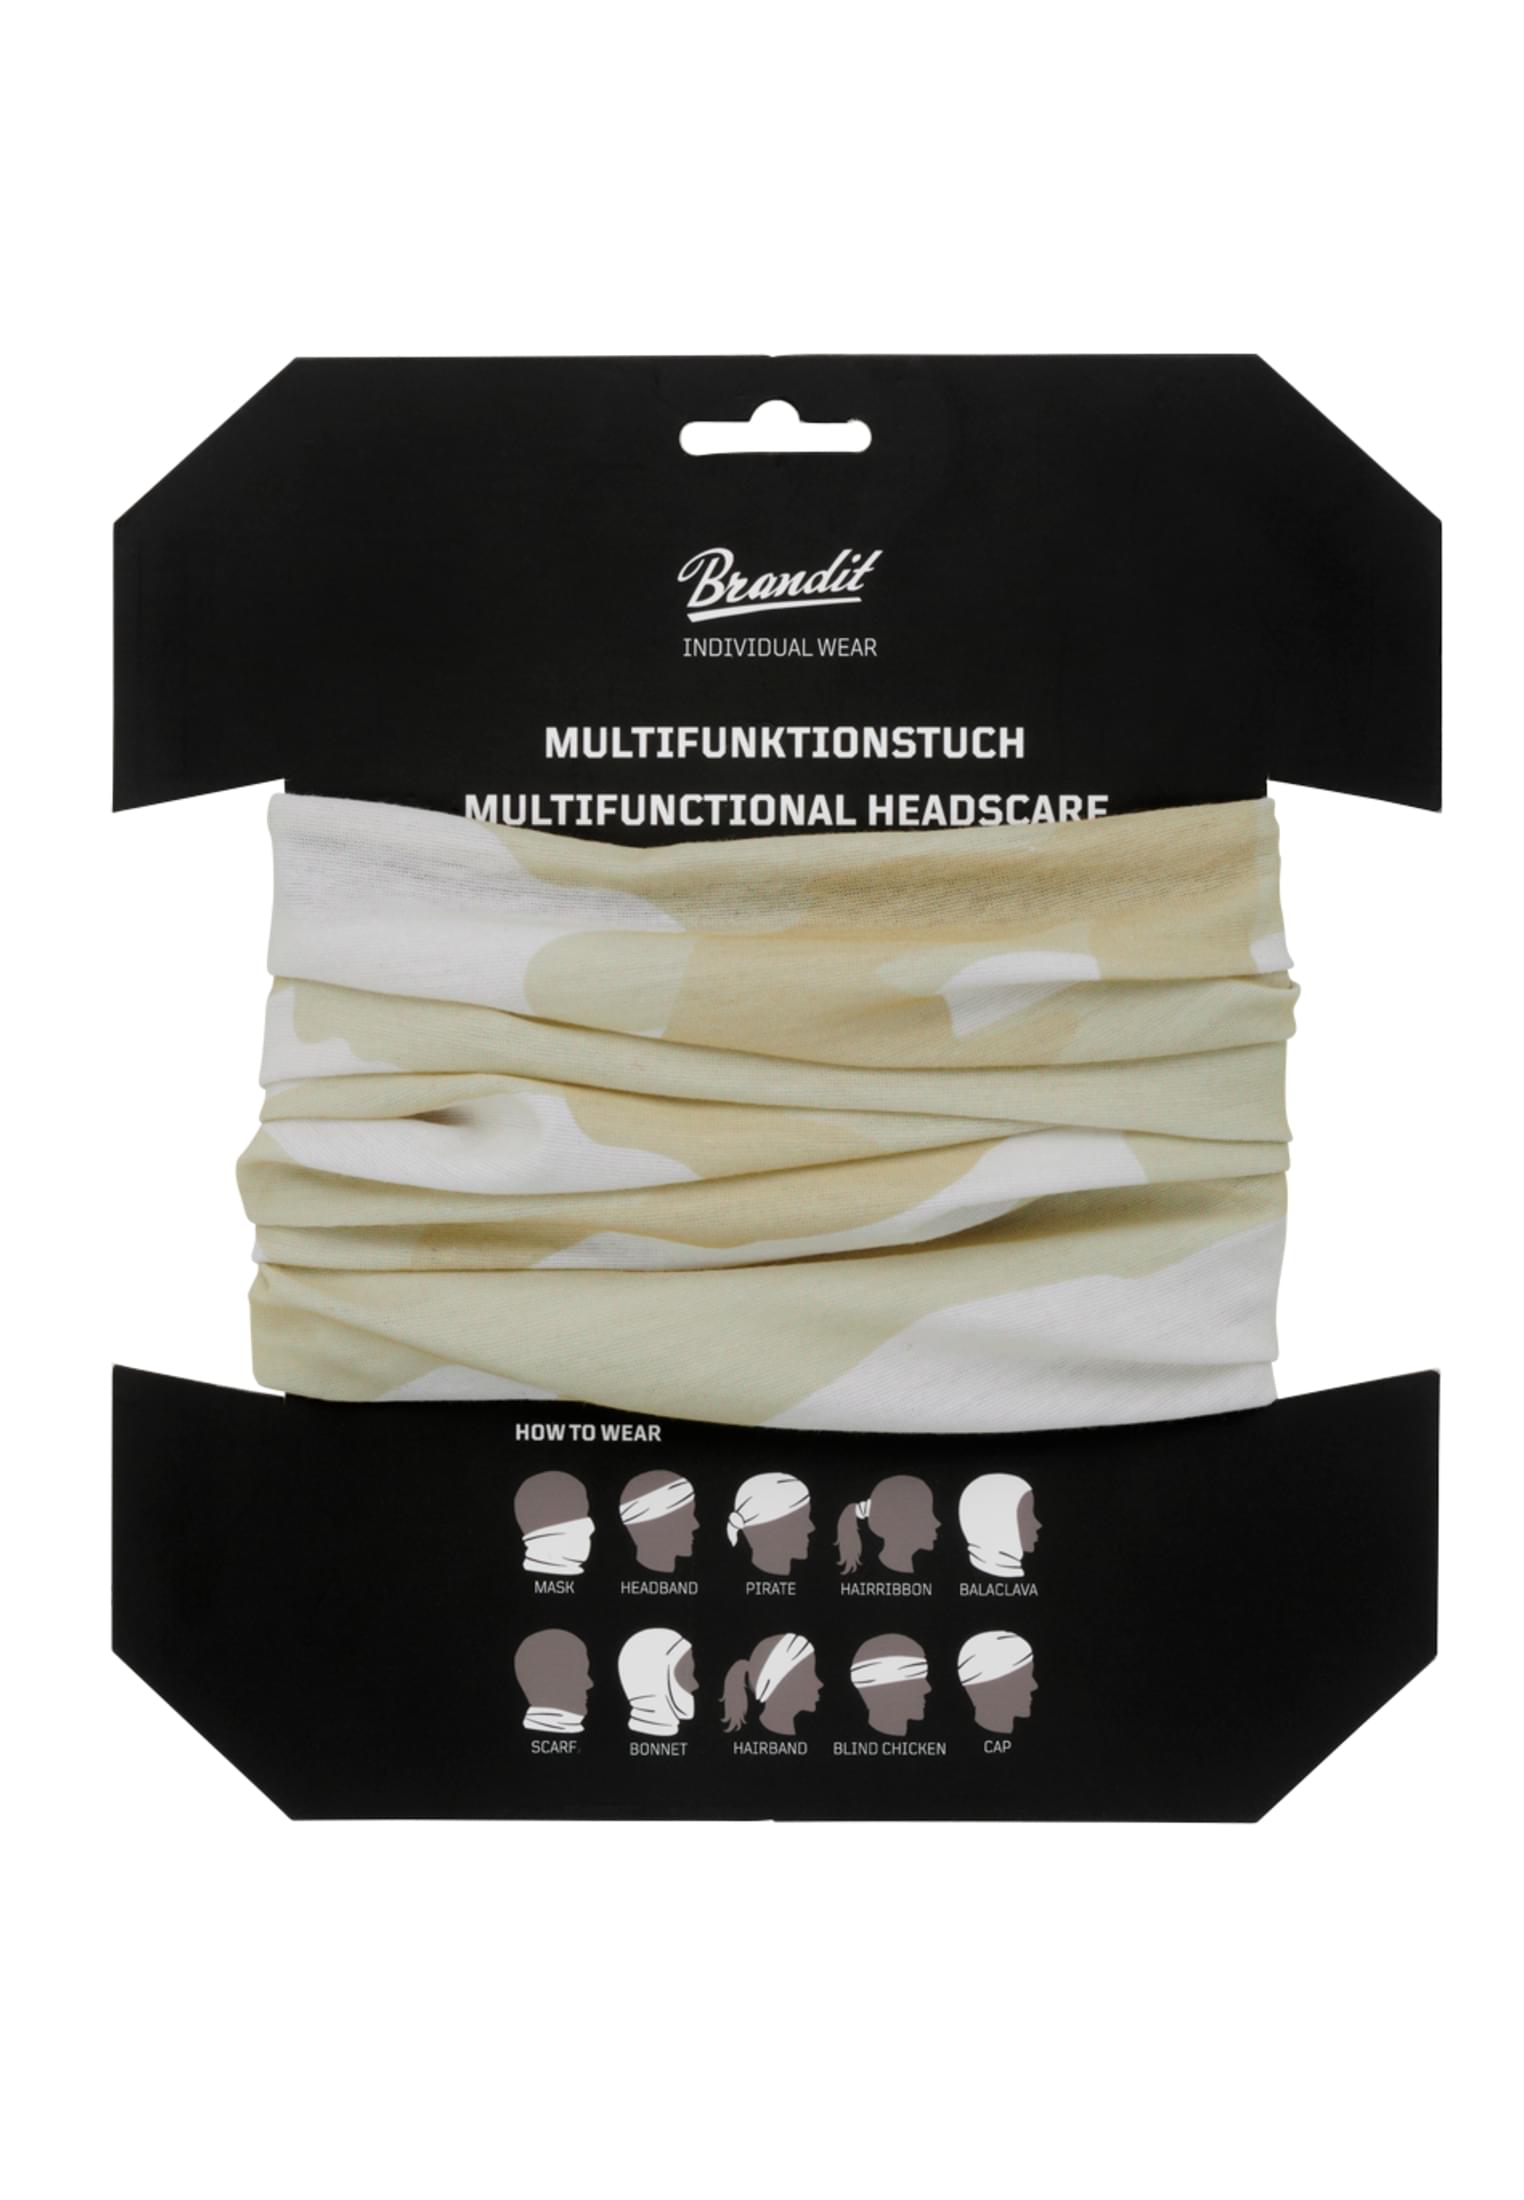 Accessoires Multifunktionstuch in Farbe sandstorm